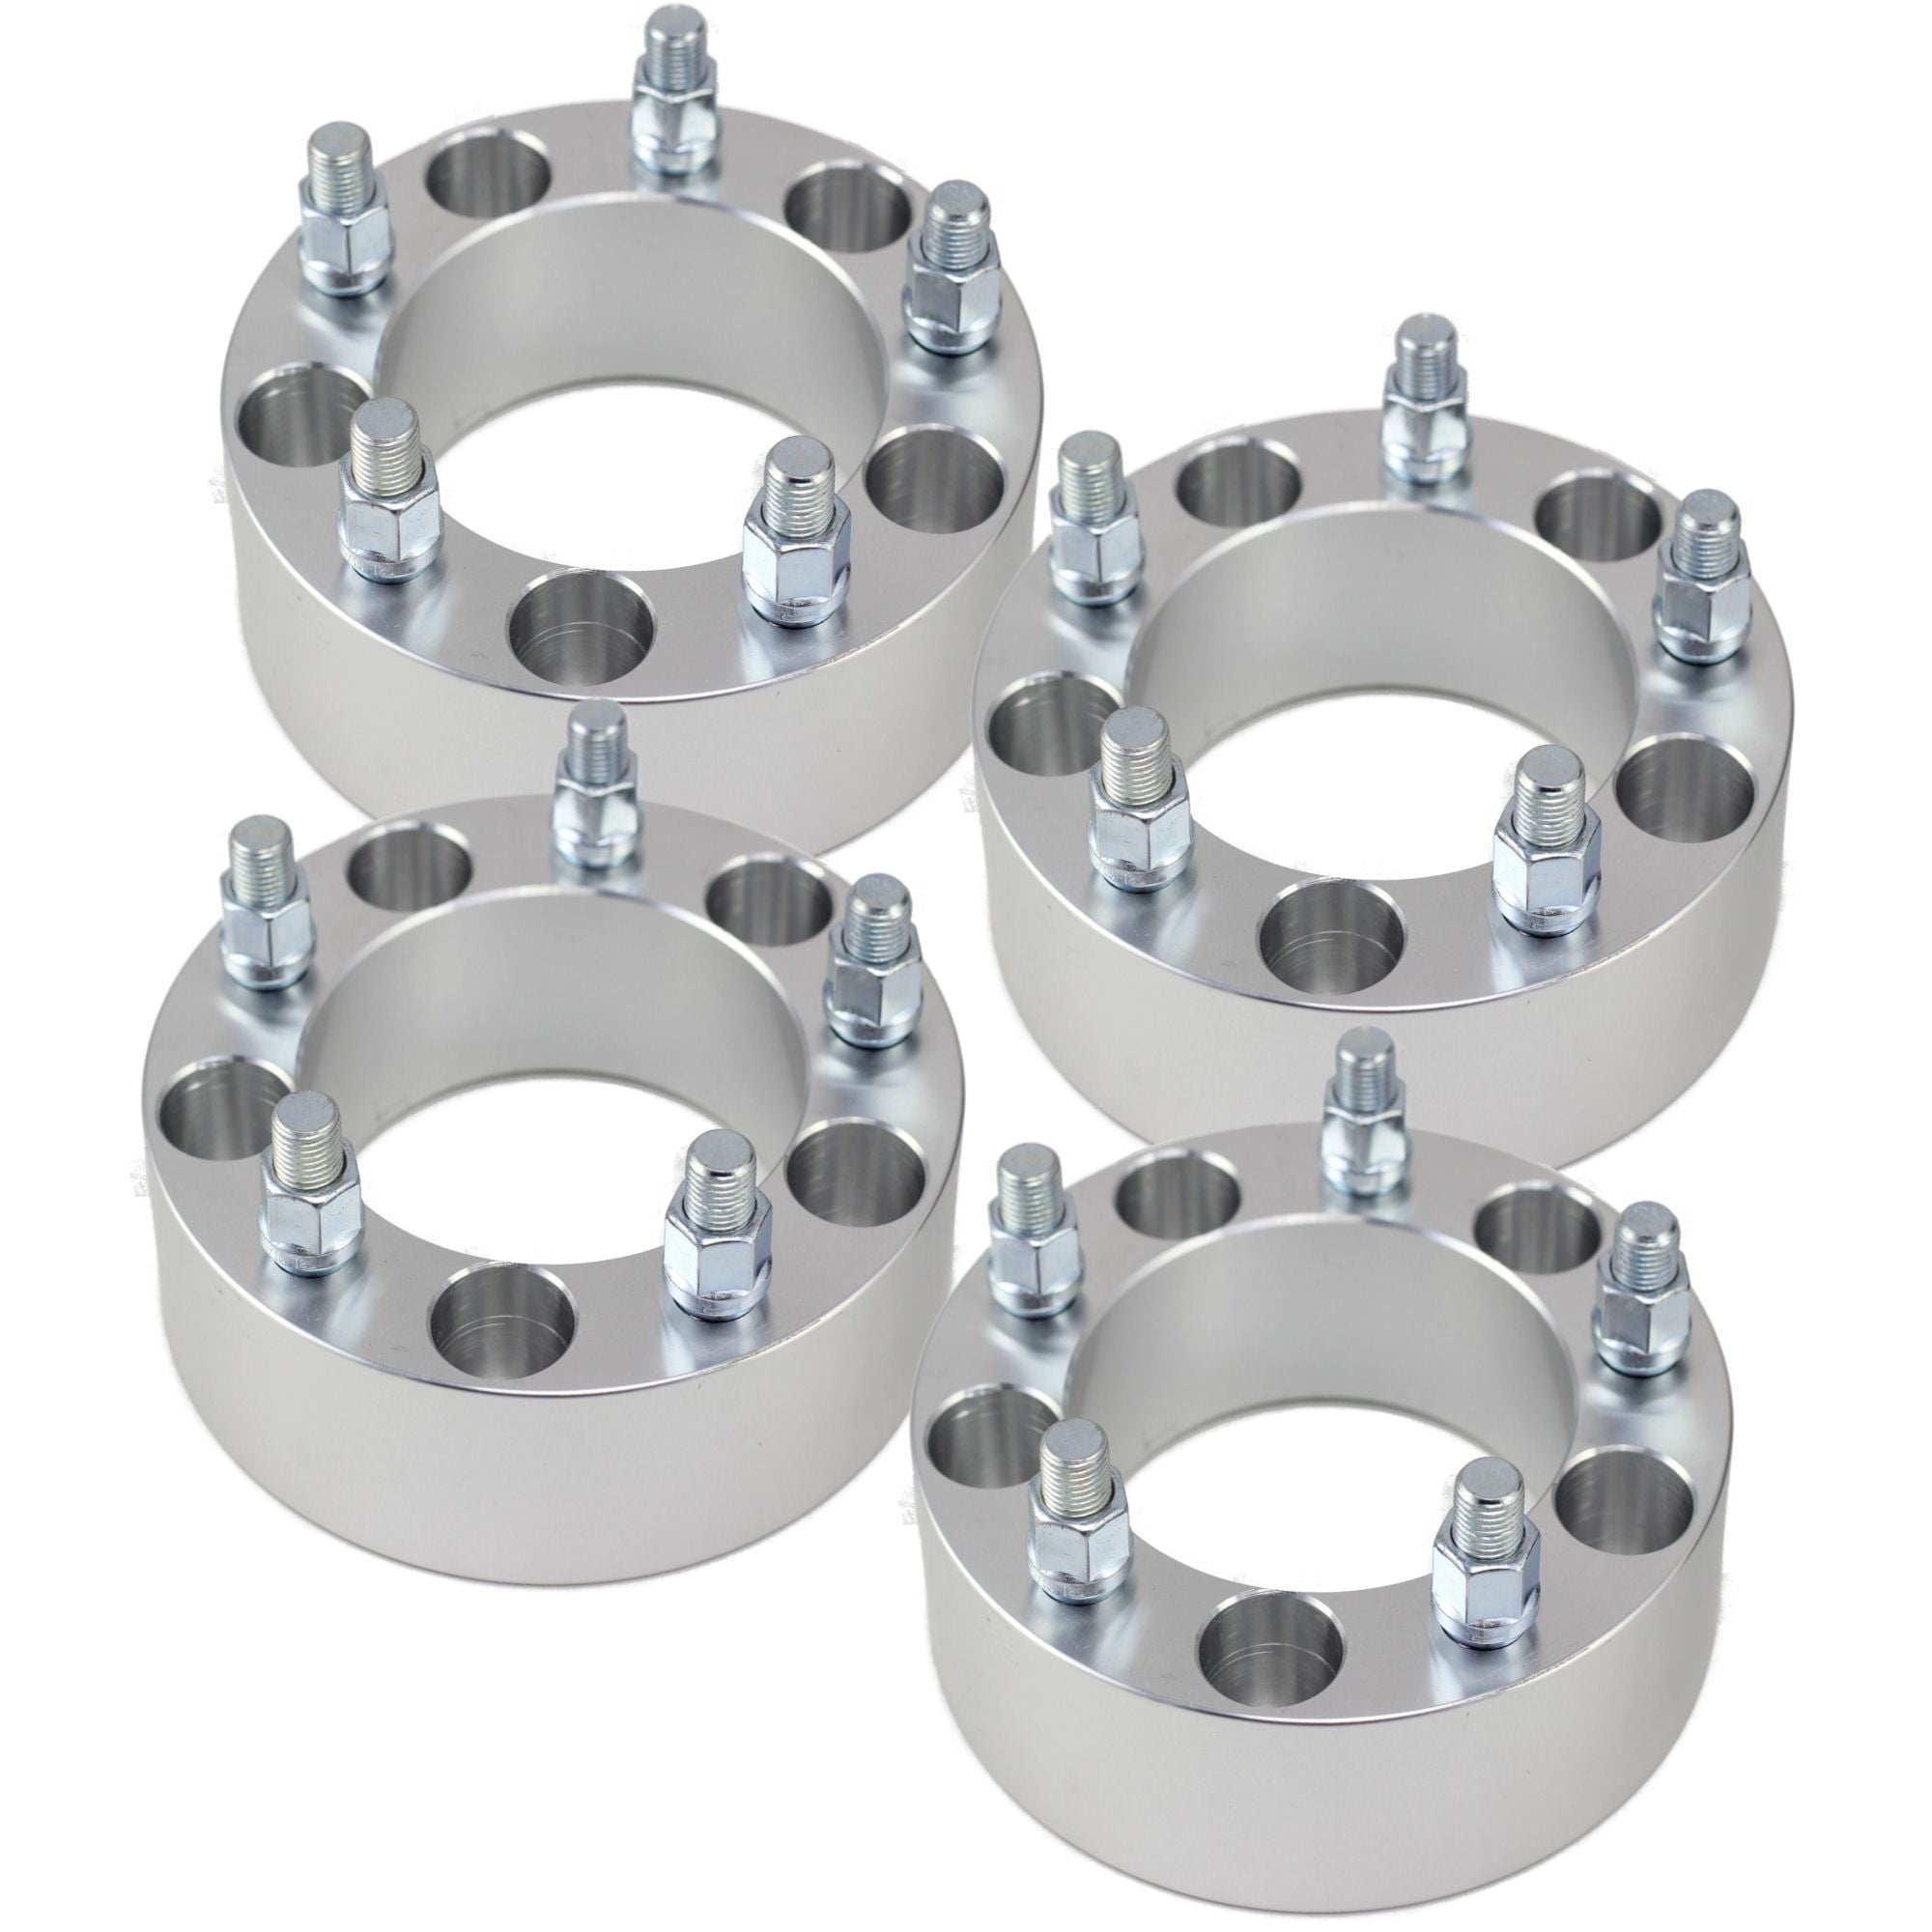 4pcs 2" 5x5.5 Wheel Spacers  108mm with Studs M14X1.5 for Dodge Ram 1500